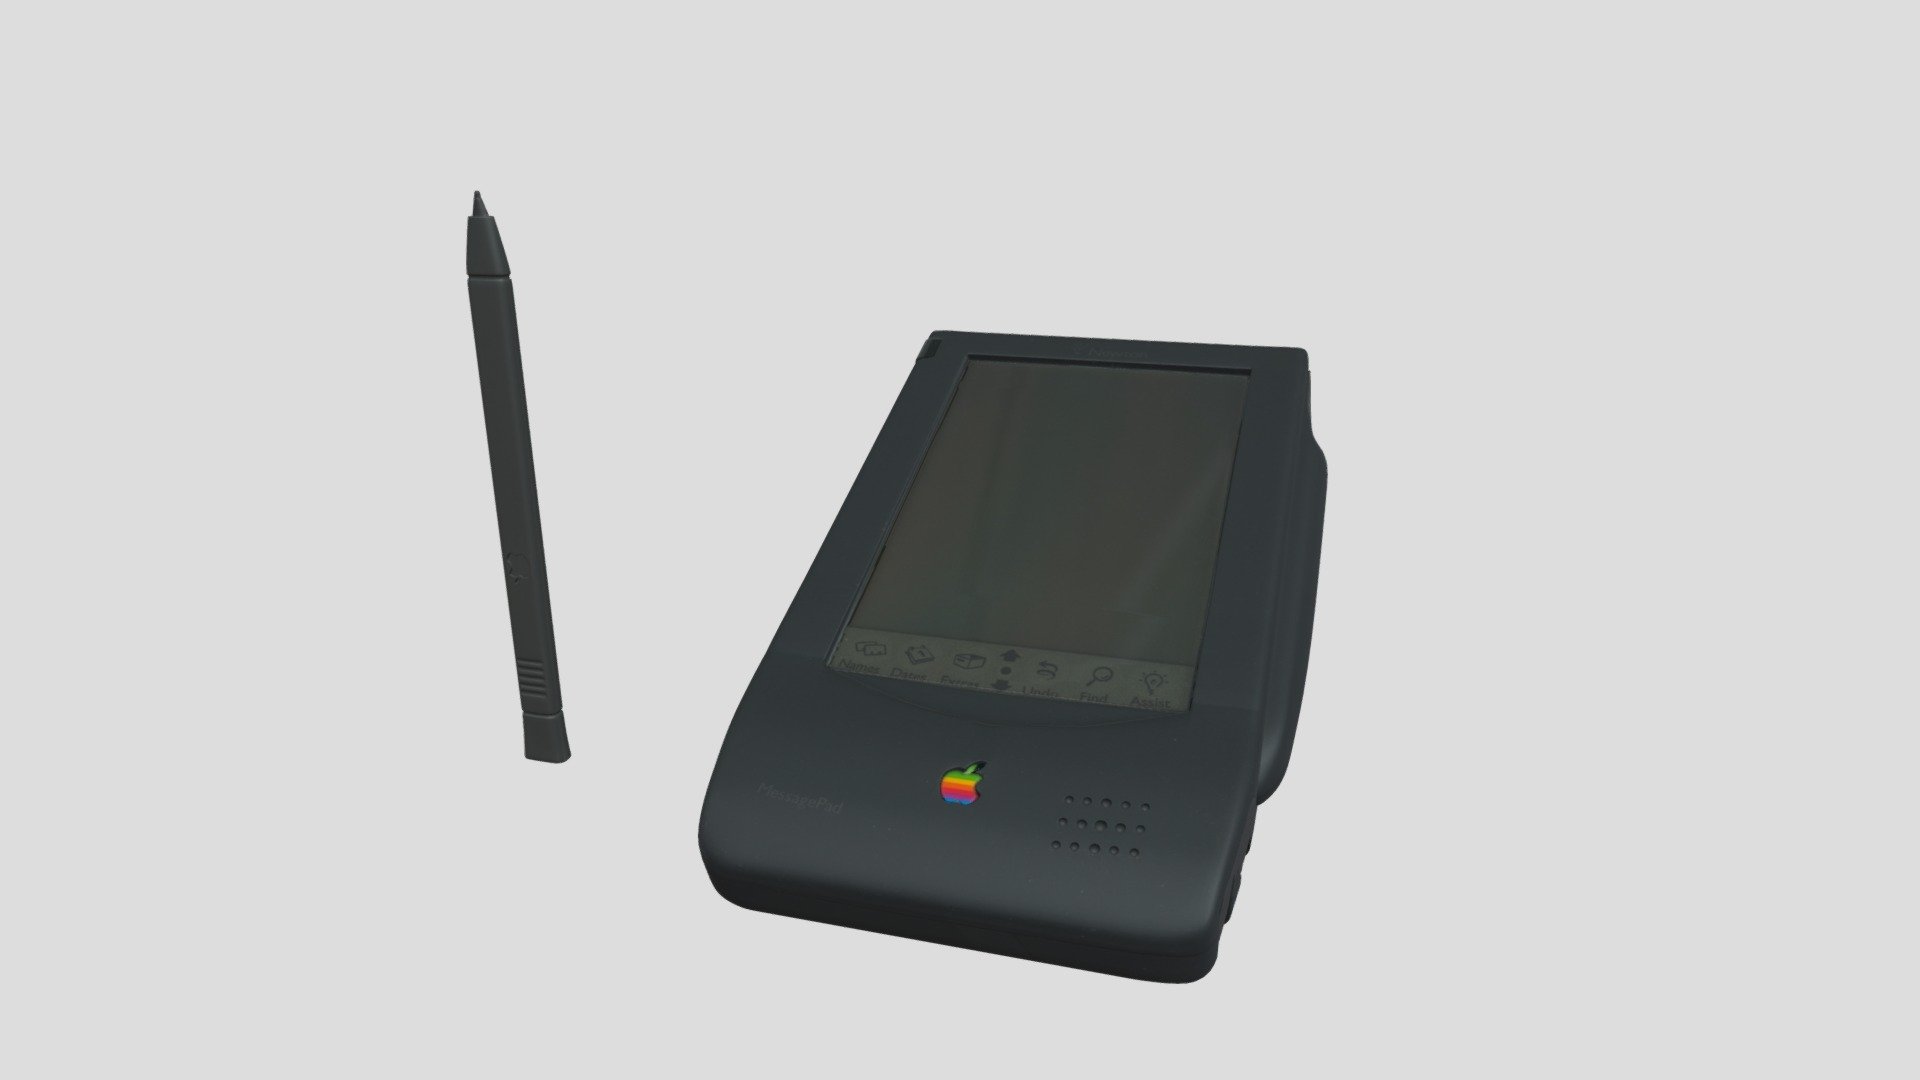 The Newton portable computer came out of the first results of Apple’s work on a miniature mobile device with a touchscreen and operated with a stylus. The design offered a range of breakthrough solutions, one of them being the handwriting recognition system. The computer’s design used a high performance, energy efficient CPU of the ARM family, which later became standard in this type of device and is still used in tablets and smartphones.

The Newton’s main purpose was time management and performing simple office tasks. The content of its built-in memory could be synchronised with computers using the Windows or MacOS operating systems over a serial interface. A wireless connection was also available in the form of an infrared port. An additional extension card allowed the Newton to be connected to the telephone network in order to send and receive faxes or use basic Internet functionalities.

Apple Computer Inc., USA (design)/Japan (production), 1993 

Inv. No. MIM1414/VII-134

Licence: CC BY-NC-SA - Personal Digital Assistant (PDA) Apple Newton - Download Free 3D model by Museum of Engineering and Technology, Krakow (@mitkrakow) 3d model